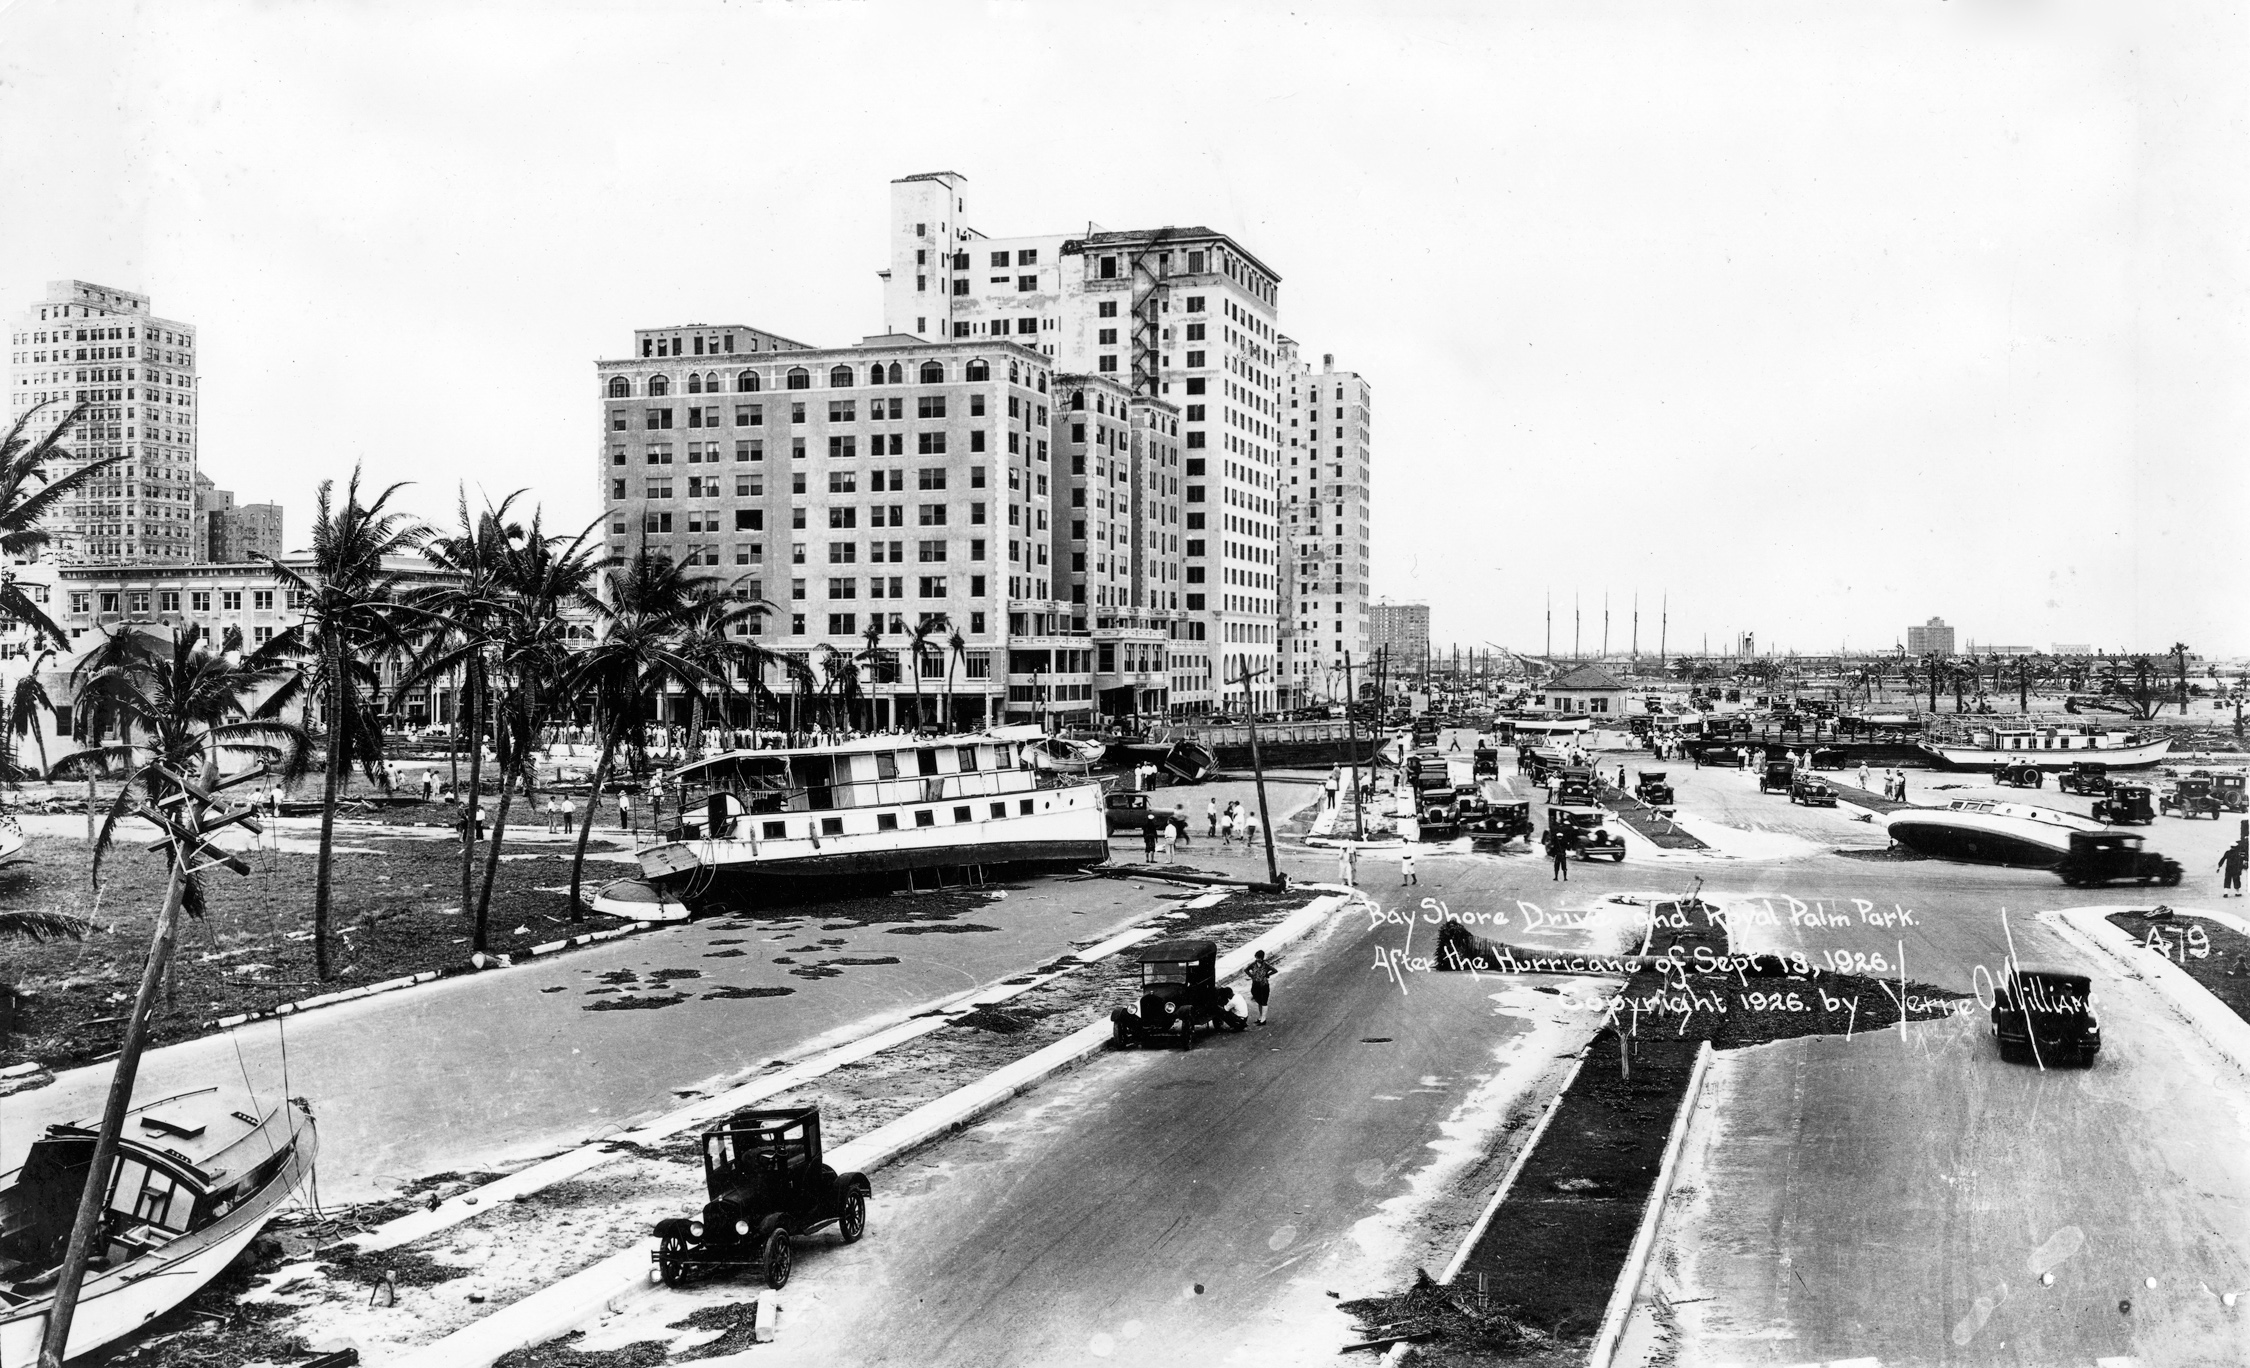 A black and white image of a street view in downtown Miami in the aftermath of a hurricane. Boats can be seen strewn along the street next to the bay with downed poles nearby.